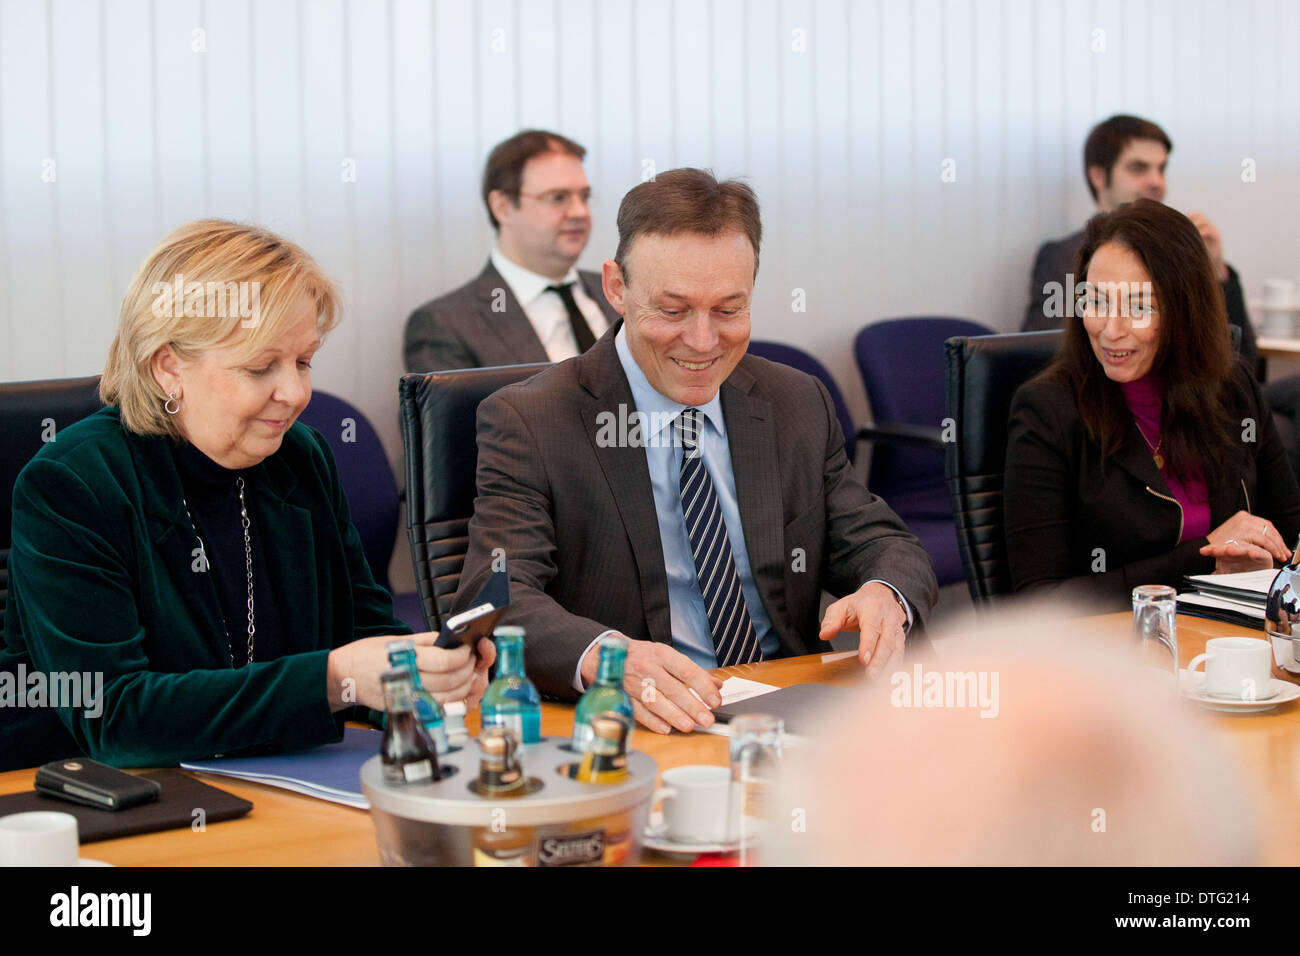 Berlin, Germany. 17th Feb, 2014. SPD party leadership meeting at Willy Brandt Haus in Berlin. / Picture: Hannelore Kraft (SPD), Minister-President of North Rhine Westphalia, and Thomas Oppermann (SPD), Lider of the SPD Parliamentary Group and Yasmin Fahimi (SPD), SPD General Secretary. Credit:  Reynaldo Paganelli/NurPhoto/ZUMAPRESS.com/Alamy Live News Stock Photo